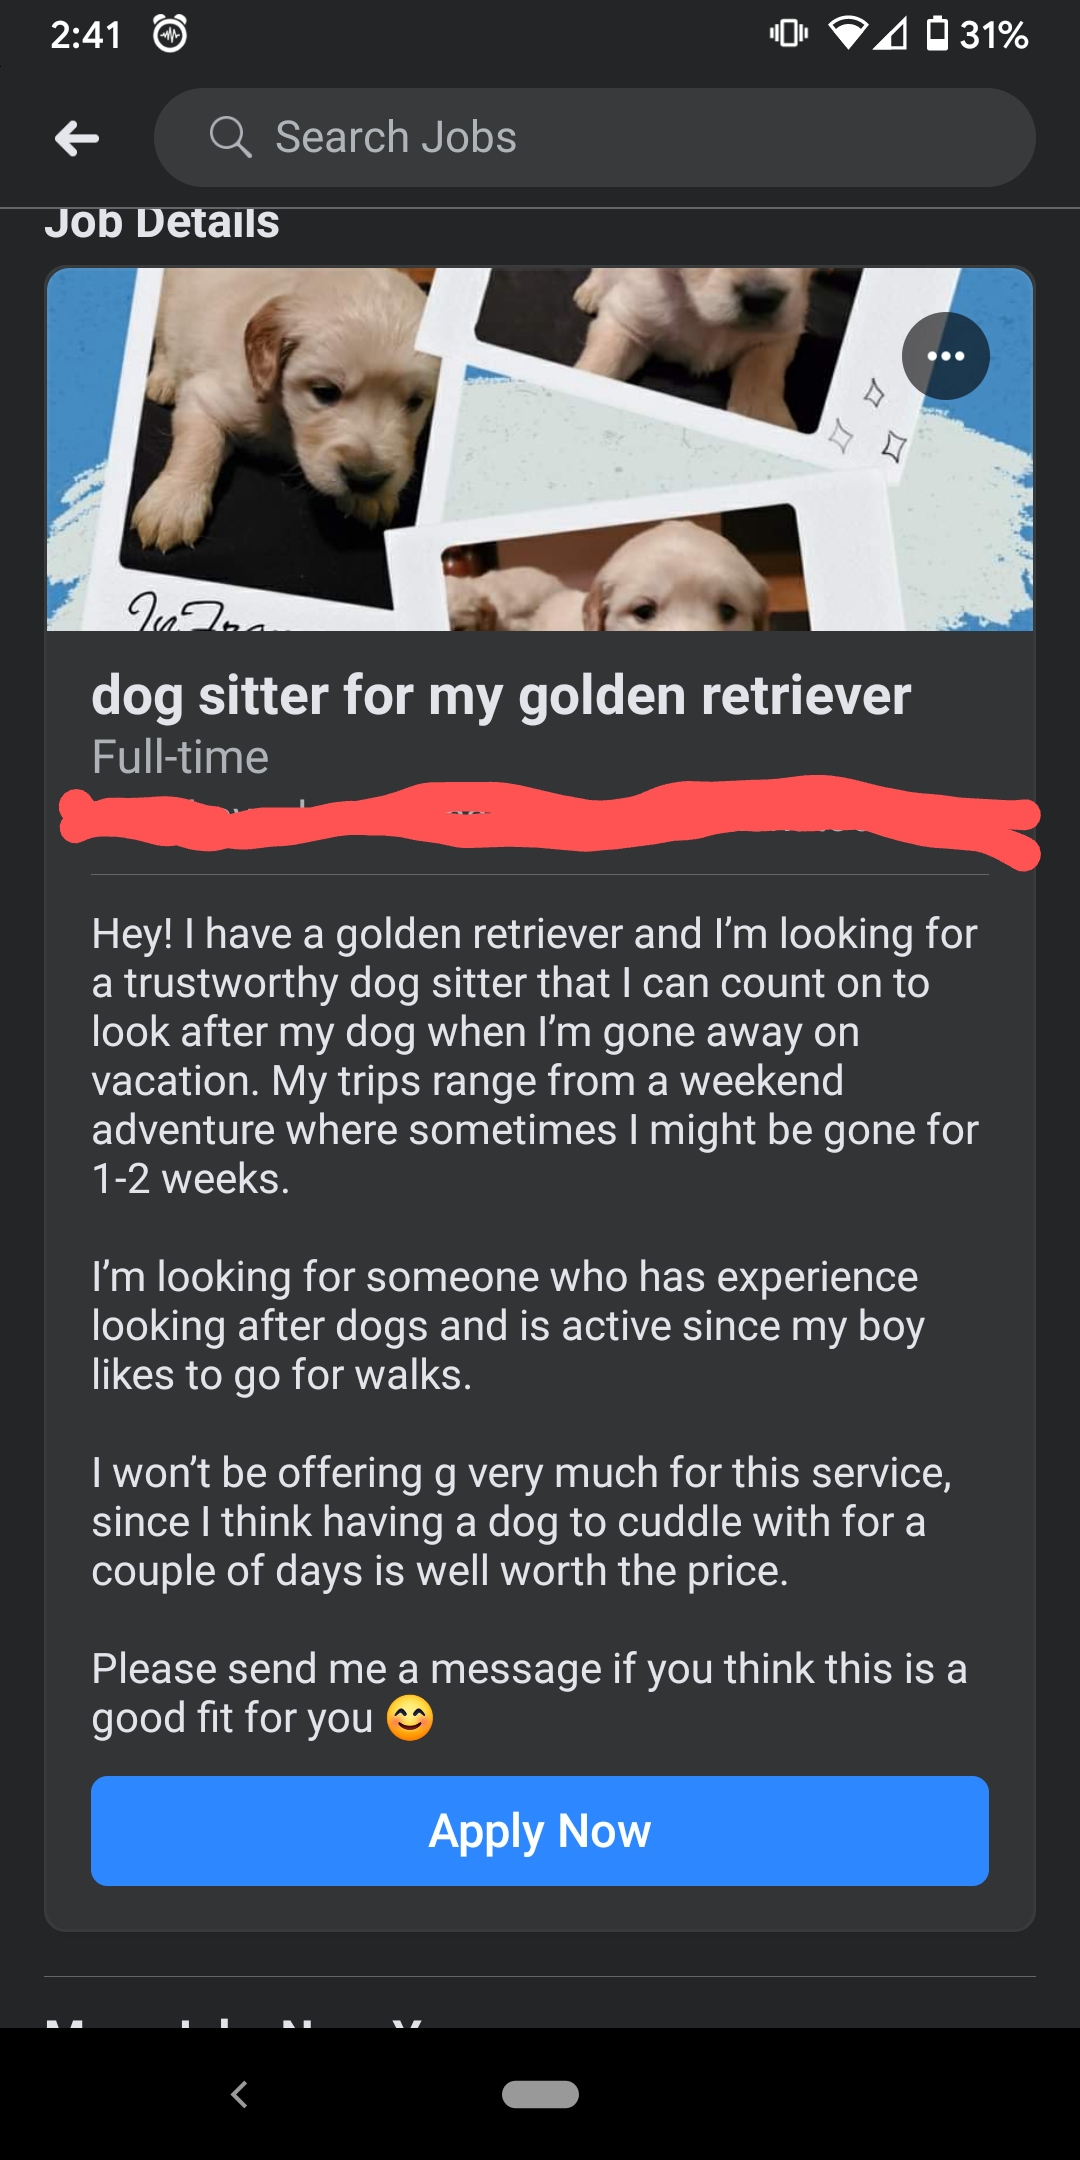 media - 2031% Q Search Jobs Job Details dog sitter for my golden retriever Fulltime Hey! I have a golden retriever and I'm looking for a trustworthy dog sitter that I can count on to look after my dog when I'm gone away on vacation. My trips range from a 